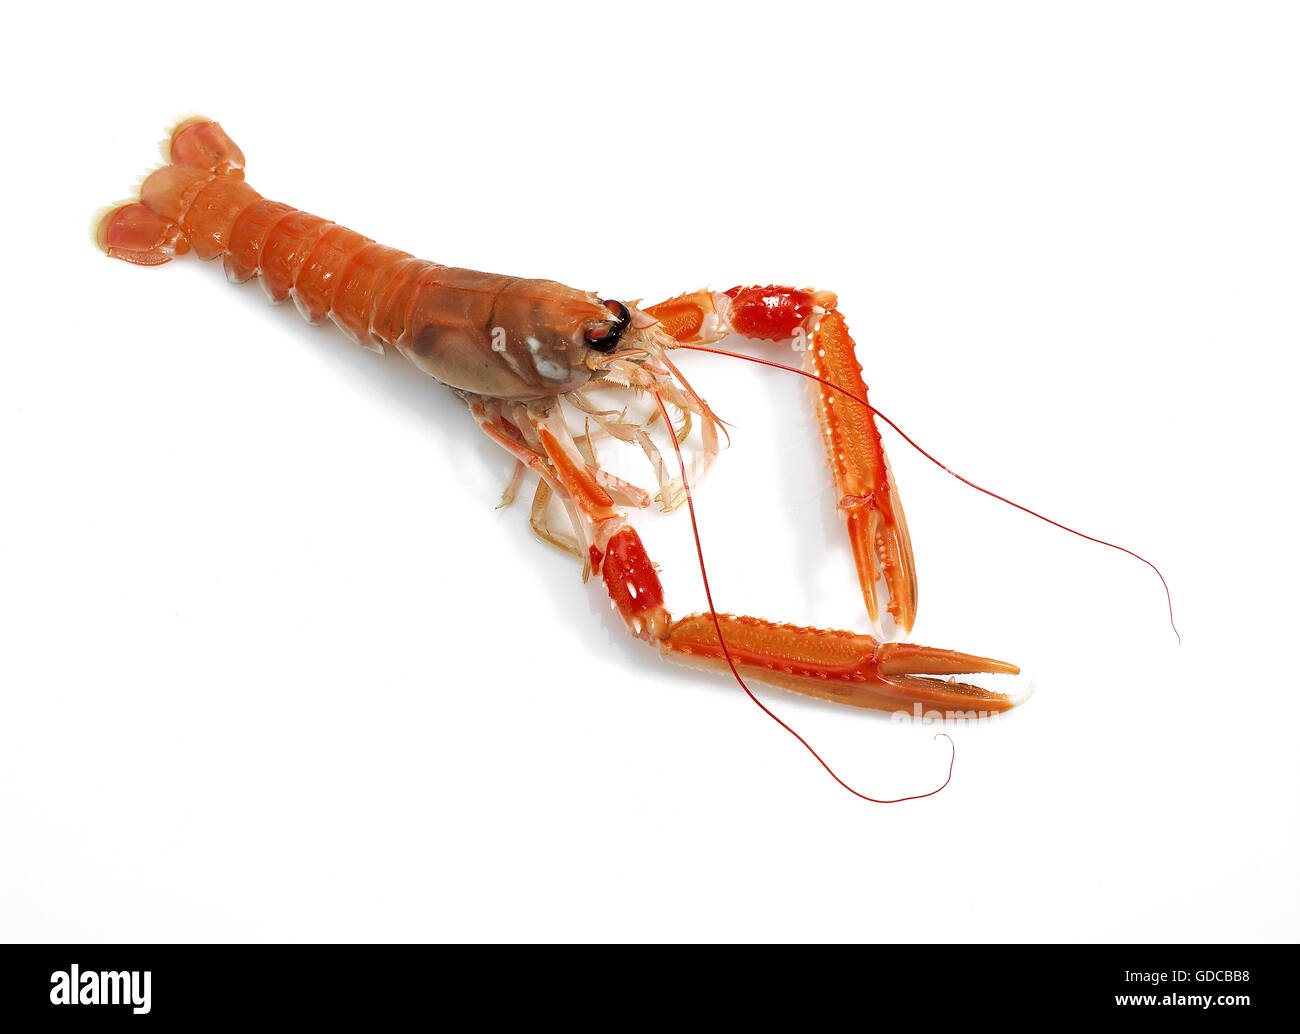 Dublin Bay Prawn or Norway Lobster or Scampi, nephrops norvegicus against White Background Stock Photo